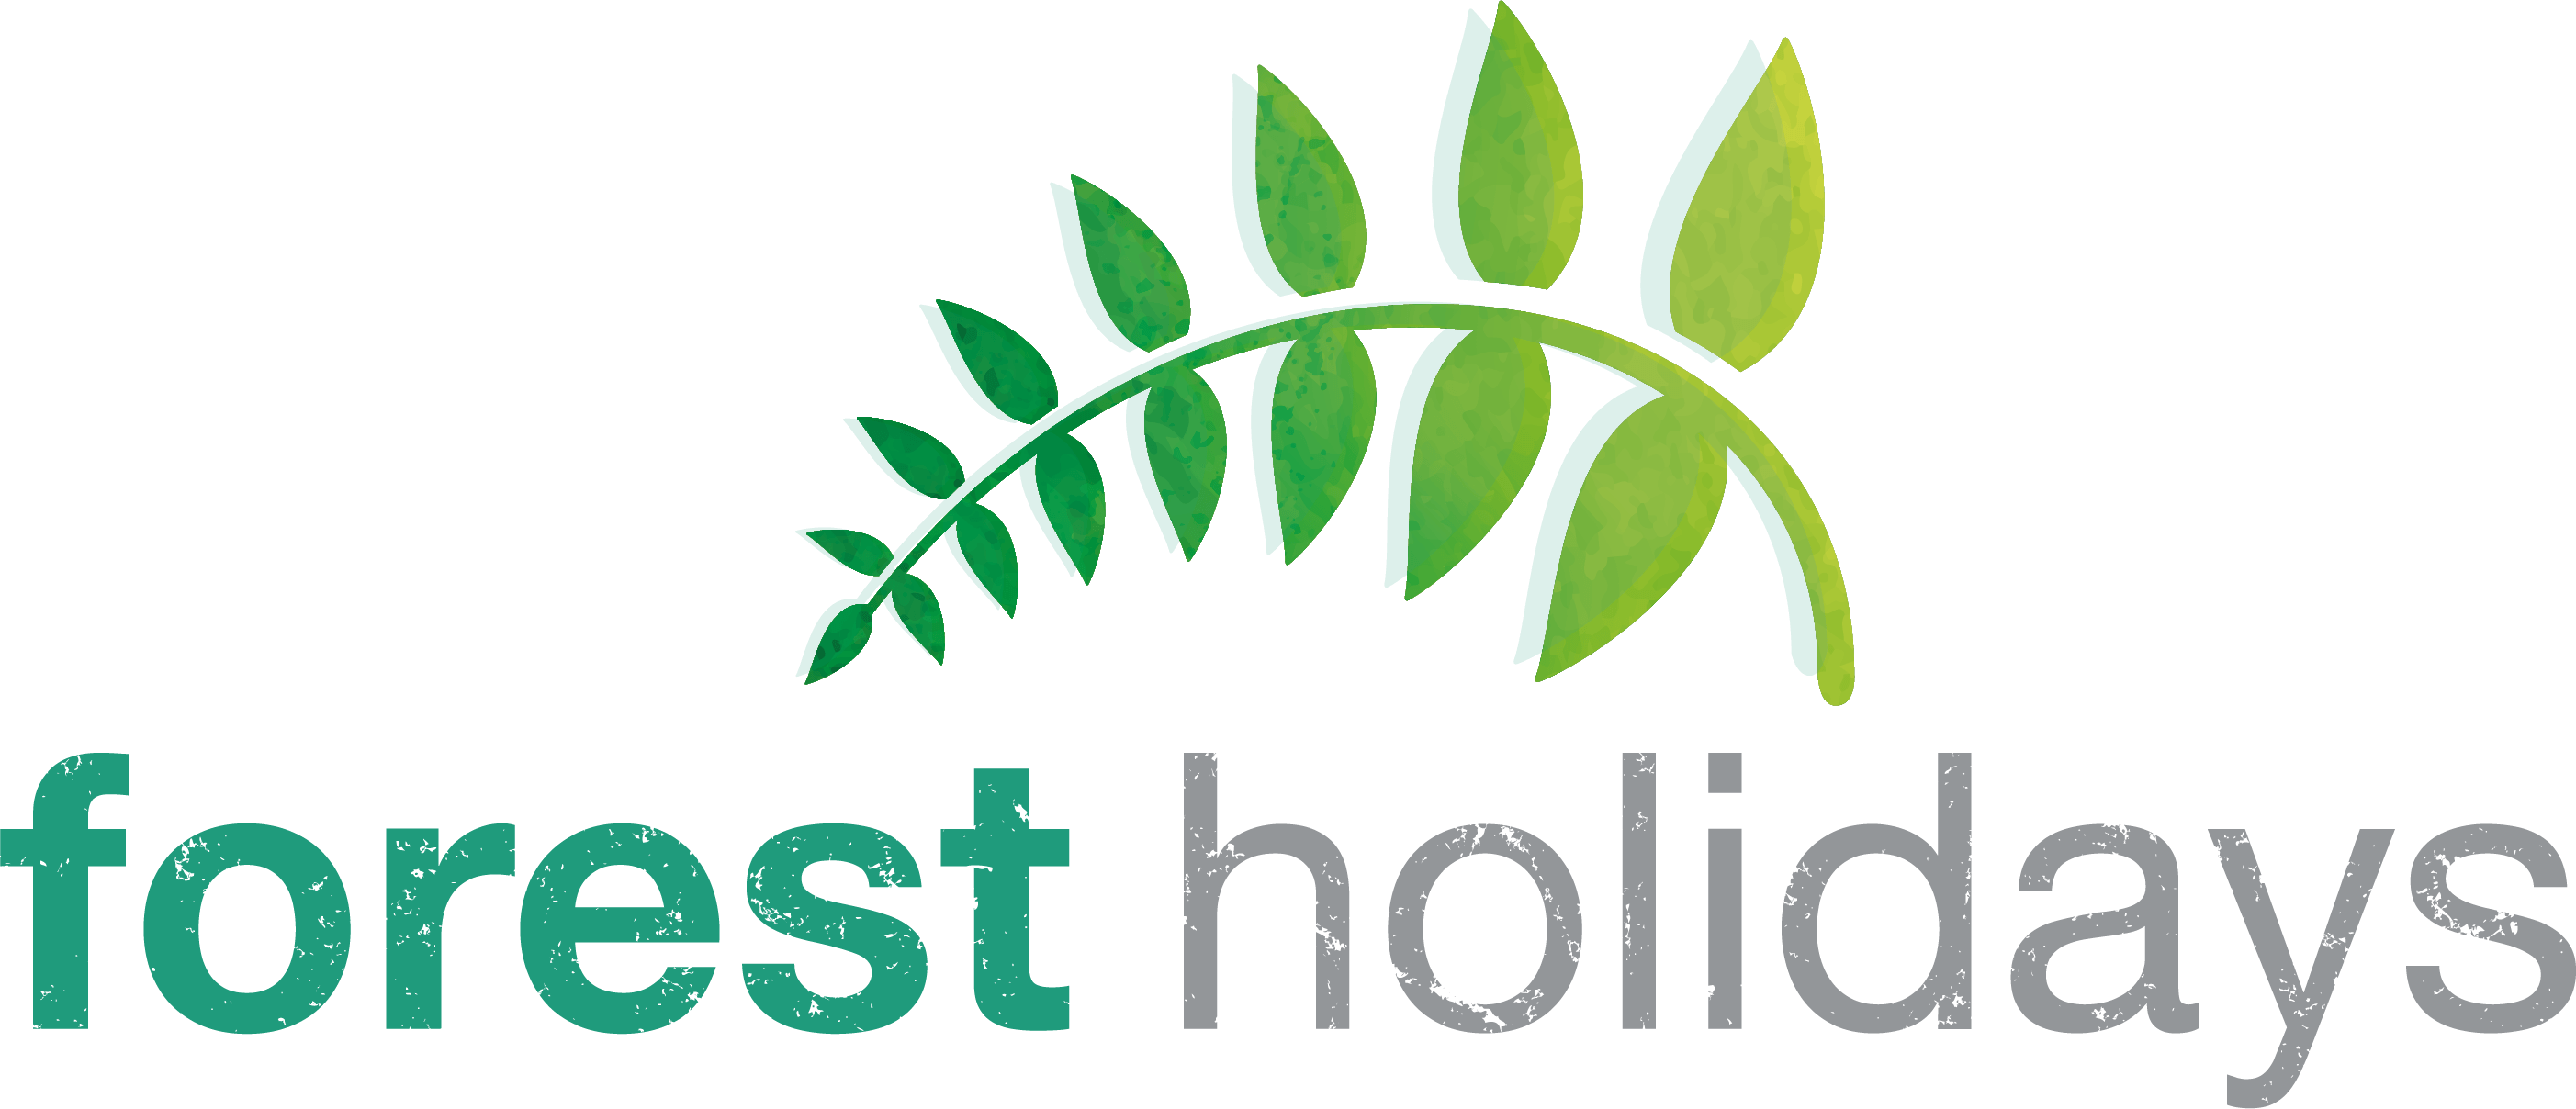 Forest Logo - Short Breaks & Holidays in England & the UK, 2019/20